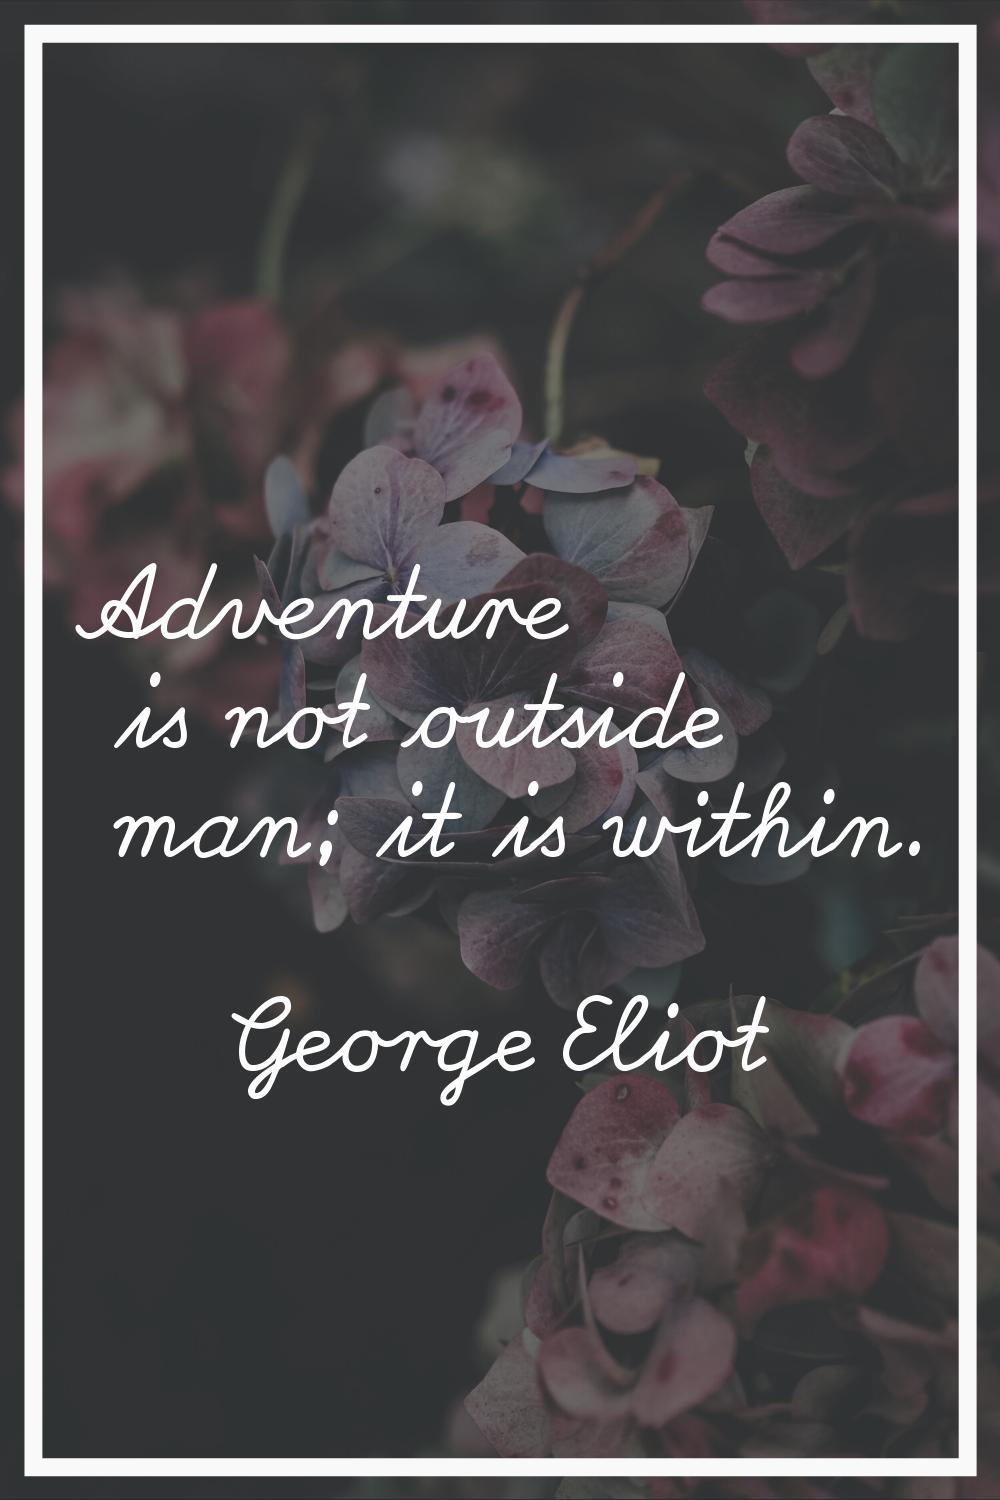 Adventure is not outside man; it is within.